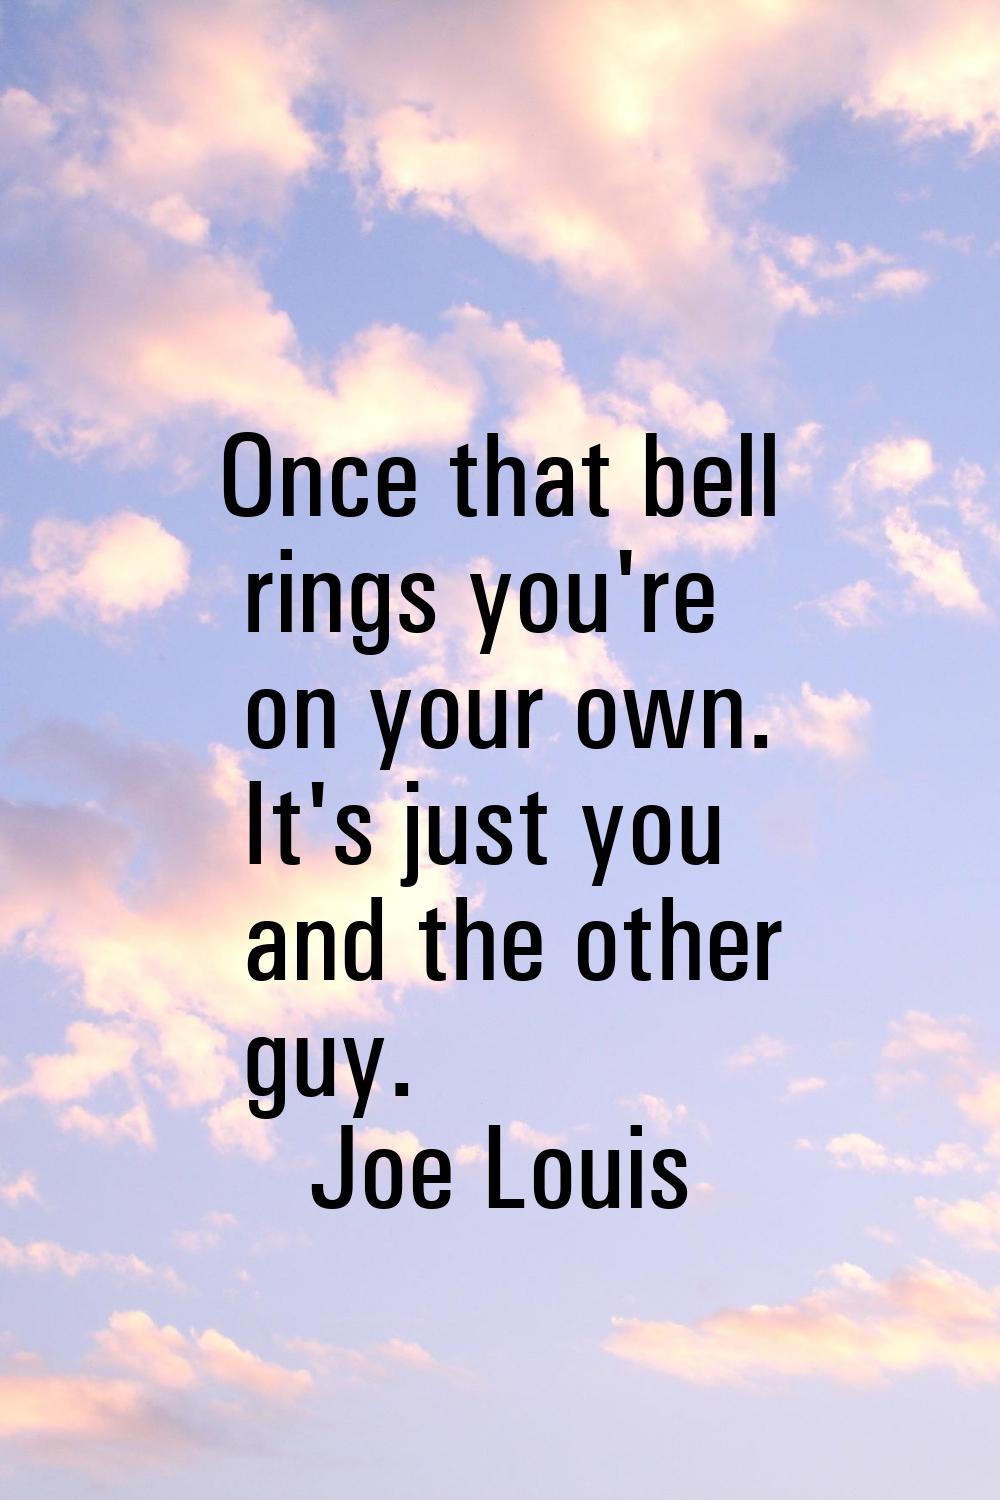 Once that bell rings you're on your own. It's just you and the other guy.